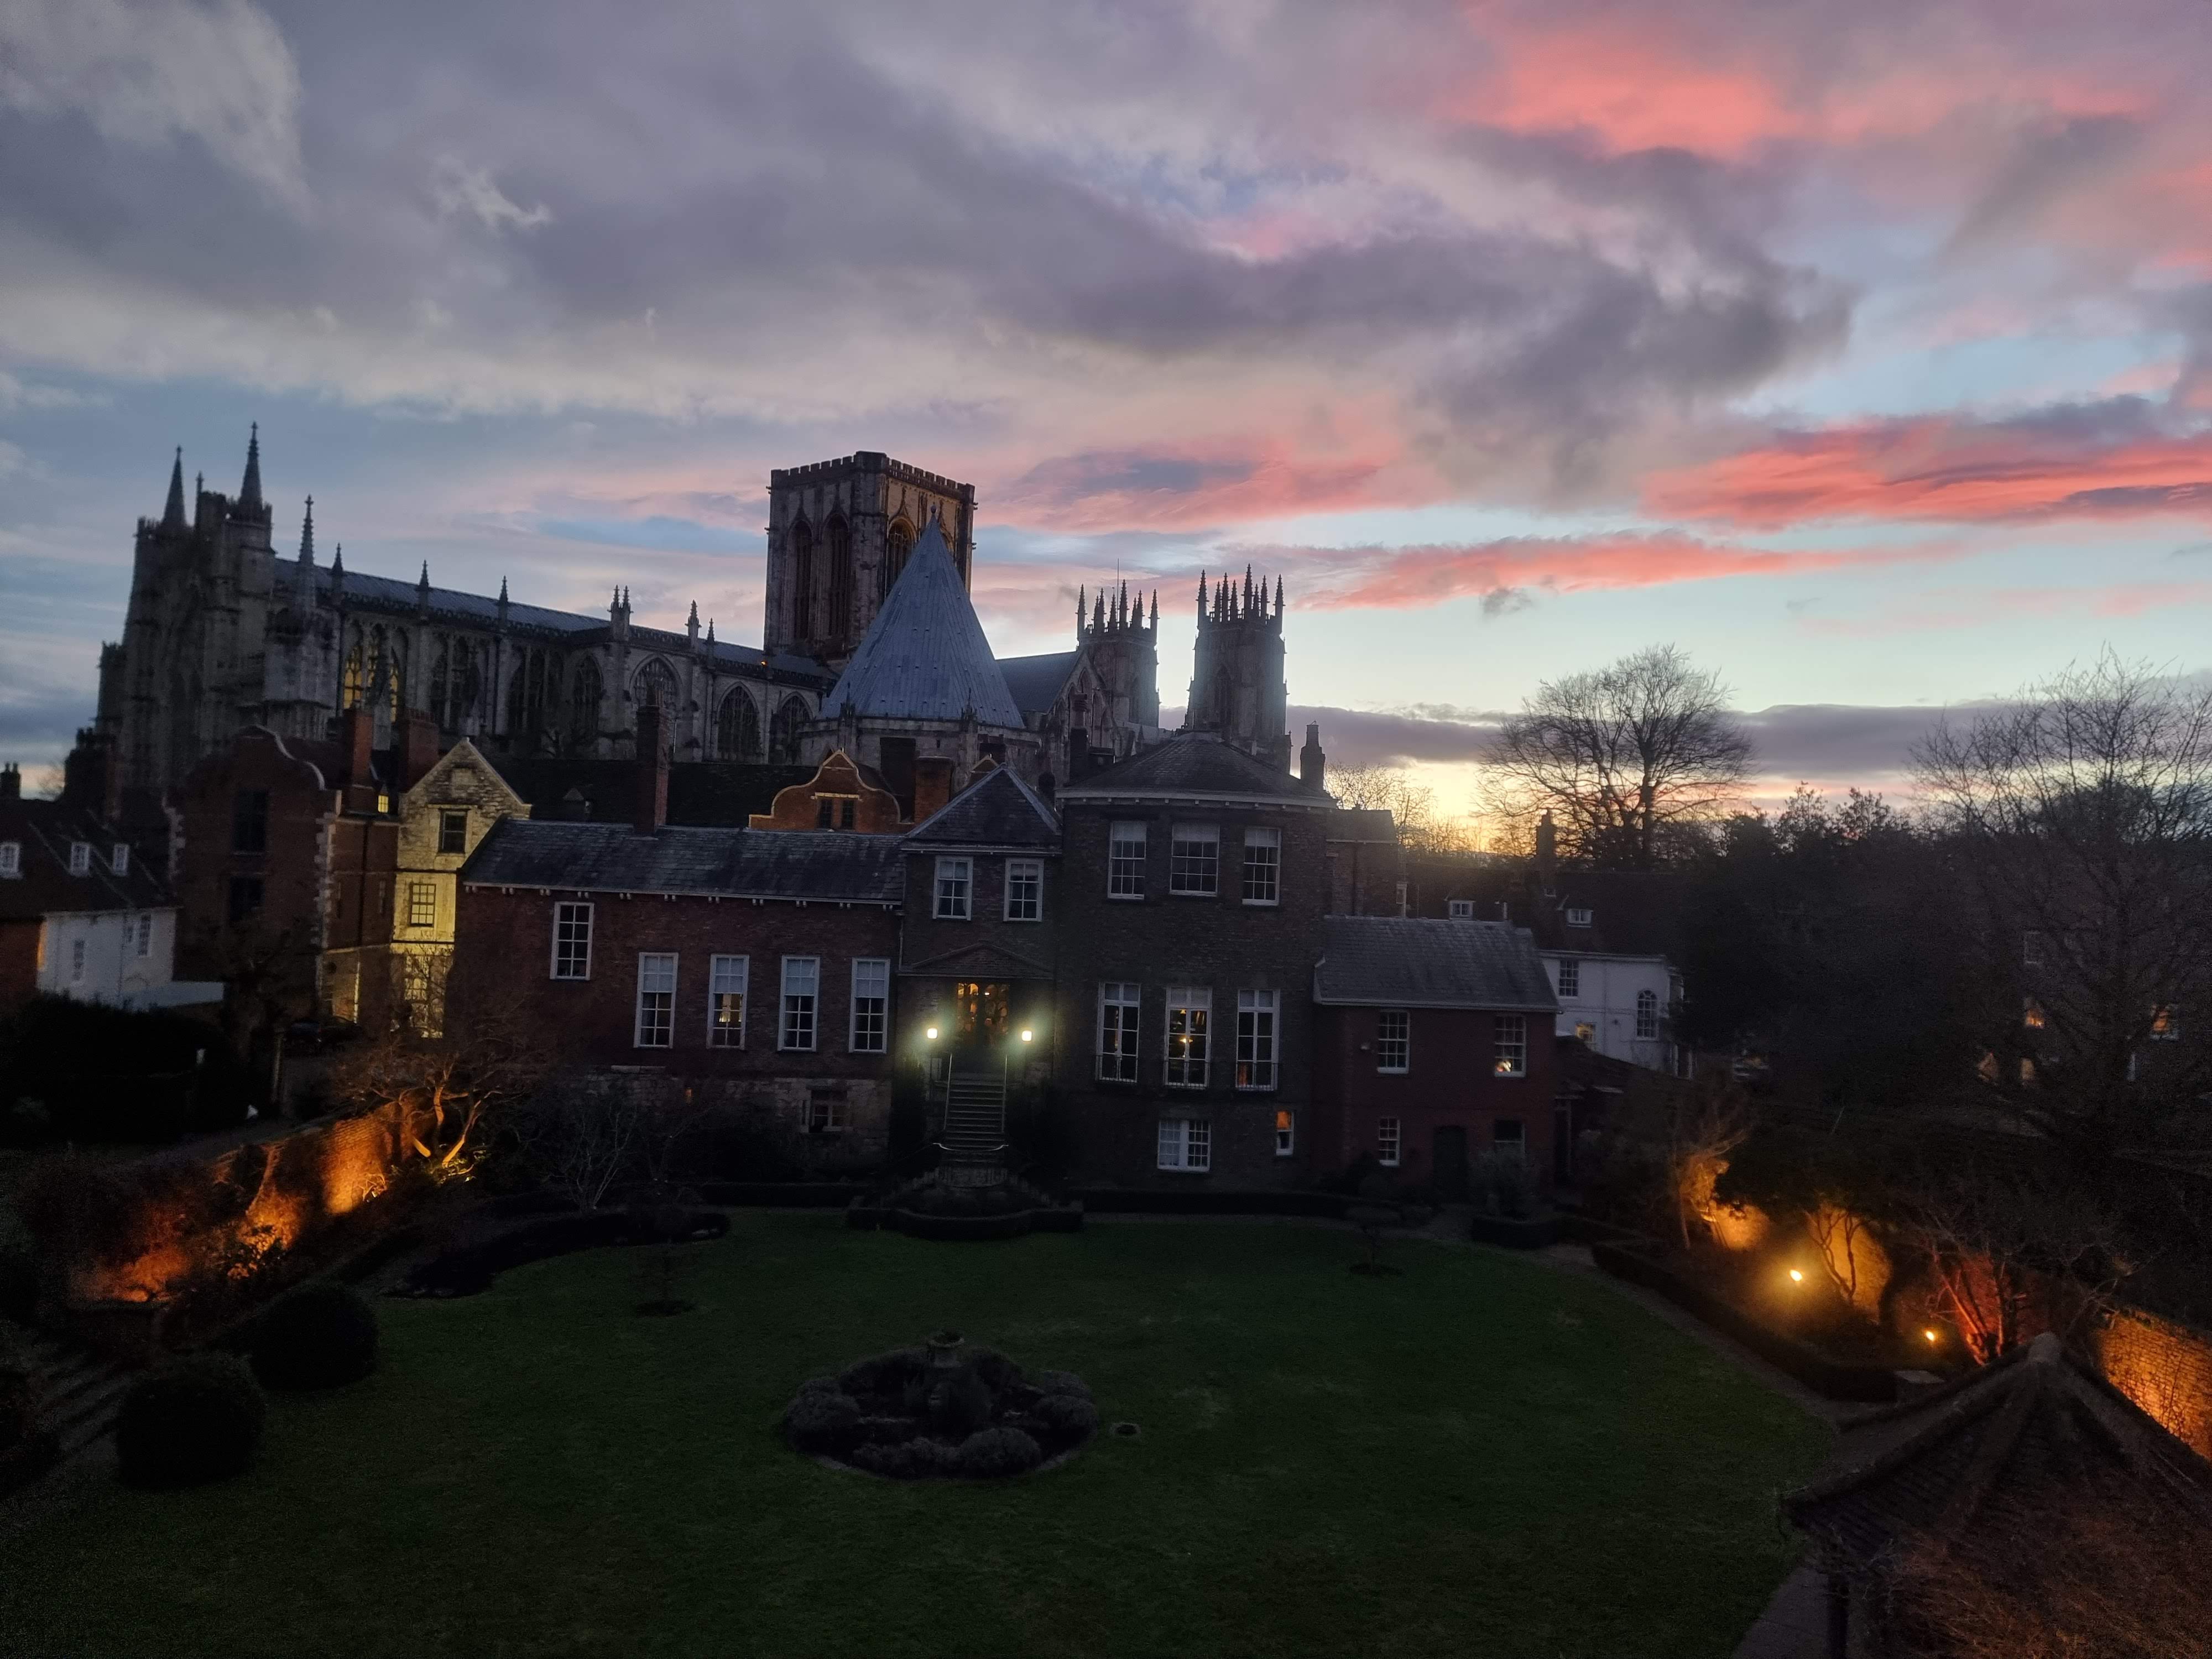 Views from the York city walls during sunset